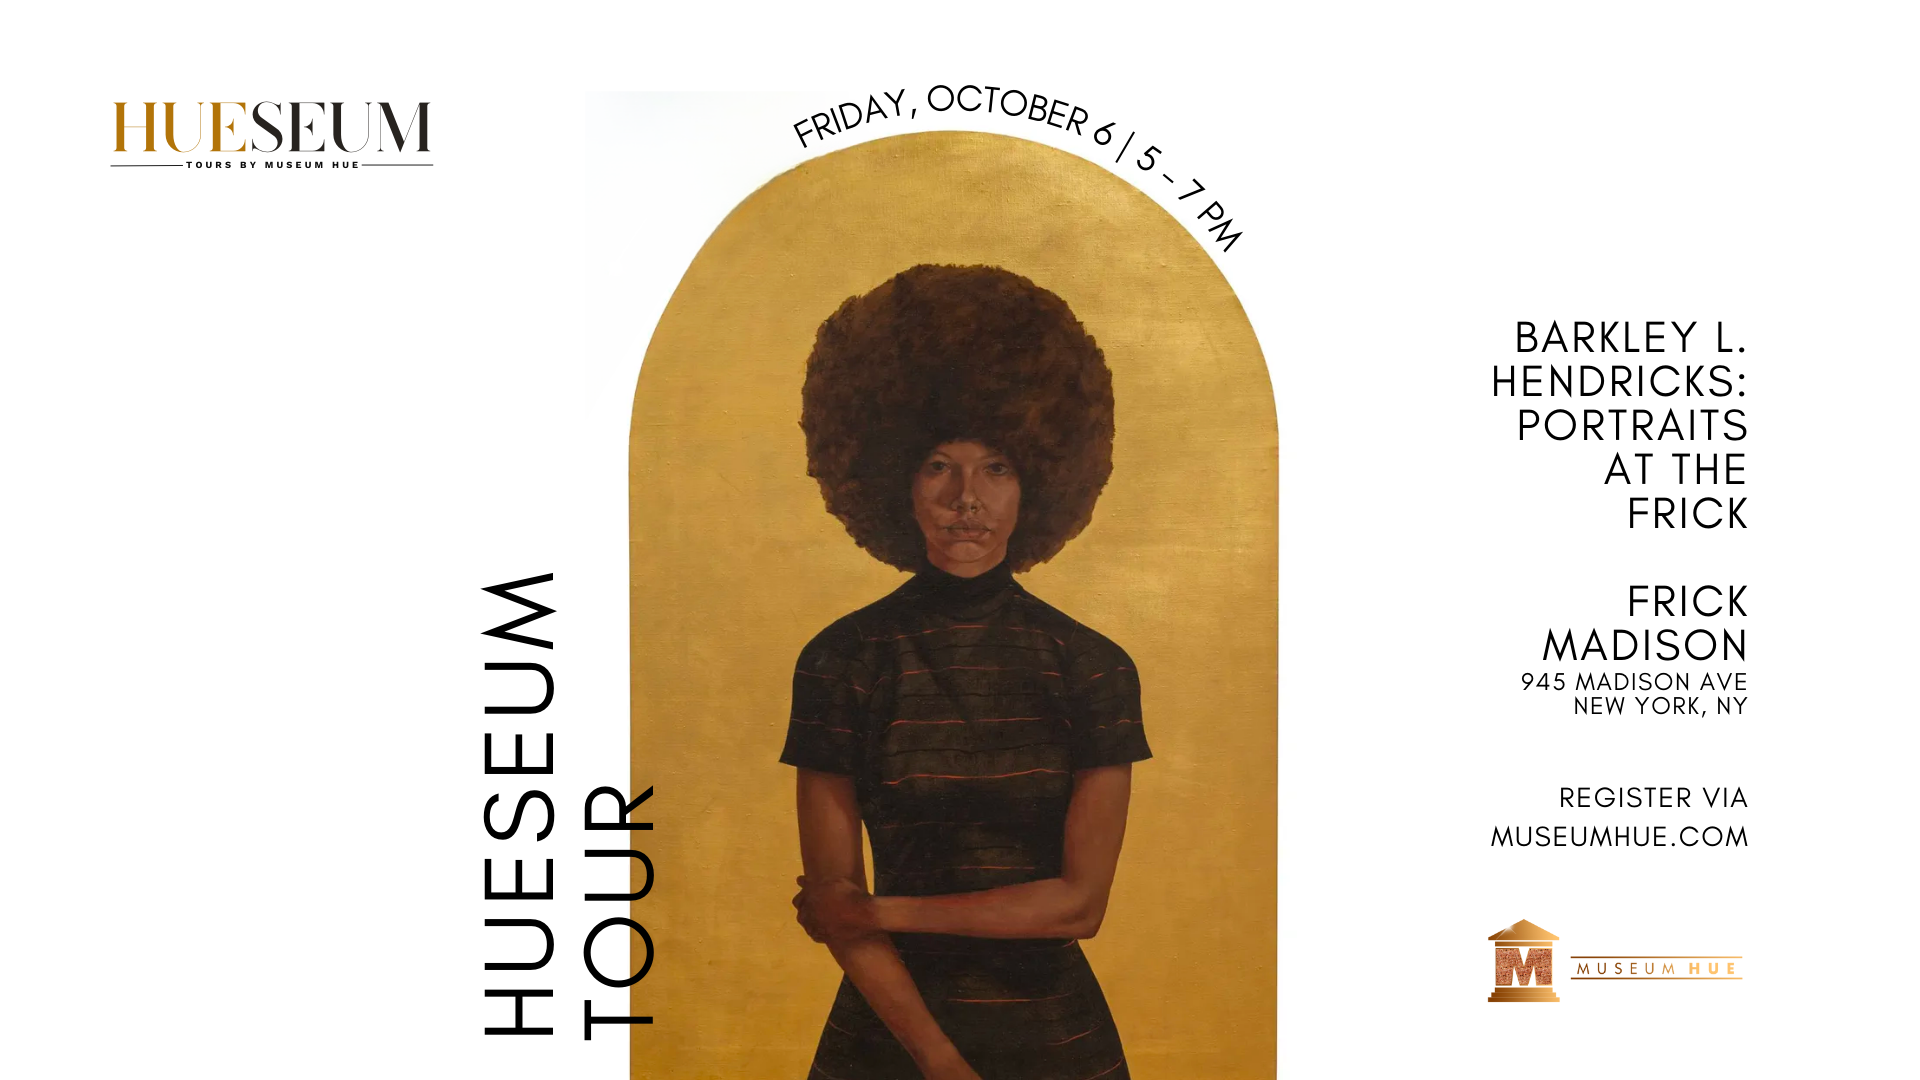 Black woman with afro in front of golden arch surrounded by the words "Hueseum Tour", Friday, October 6, 5-7pm. To the right side is additional text: "Barkley L. Hendricks: Portraits at the Frick. Frick Madison. 945 Madison Avenue, New York, NY. Register via Museumhue.com."